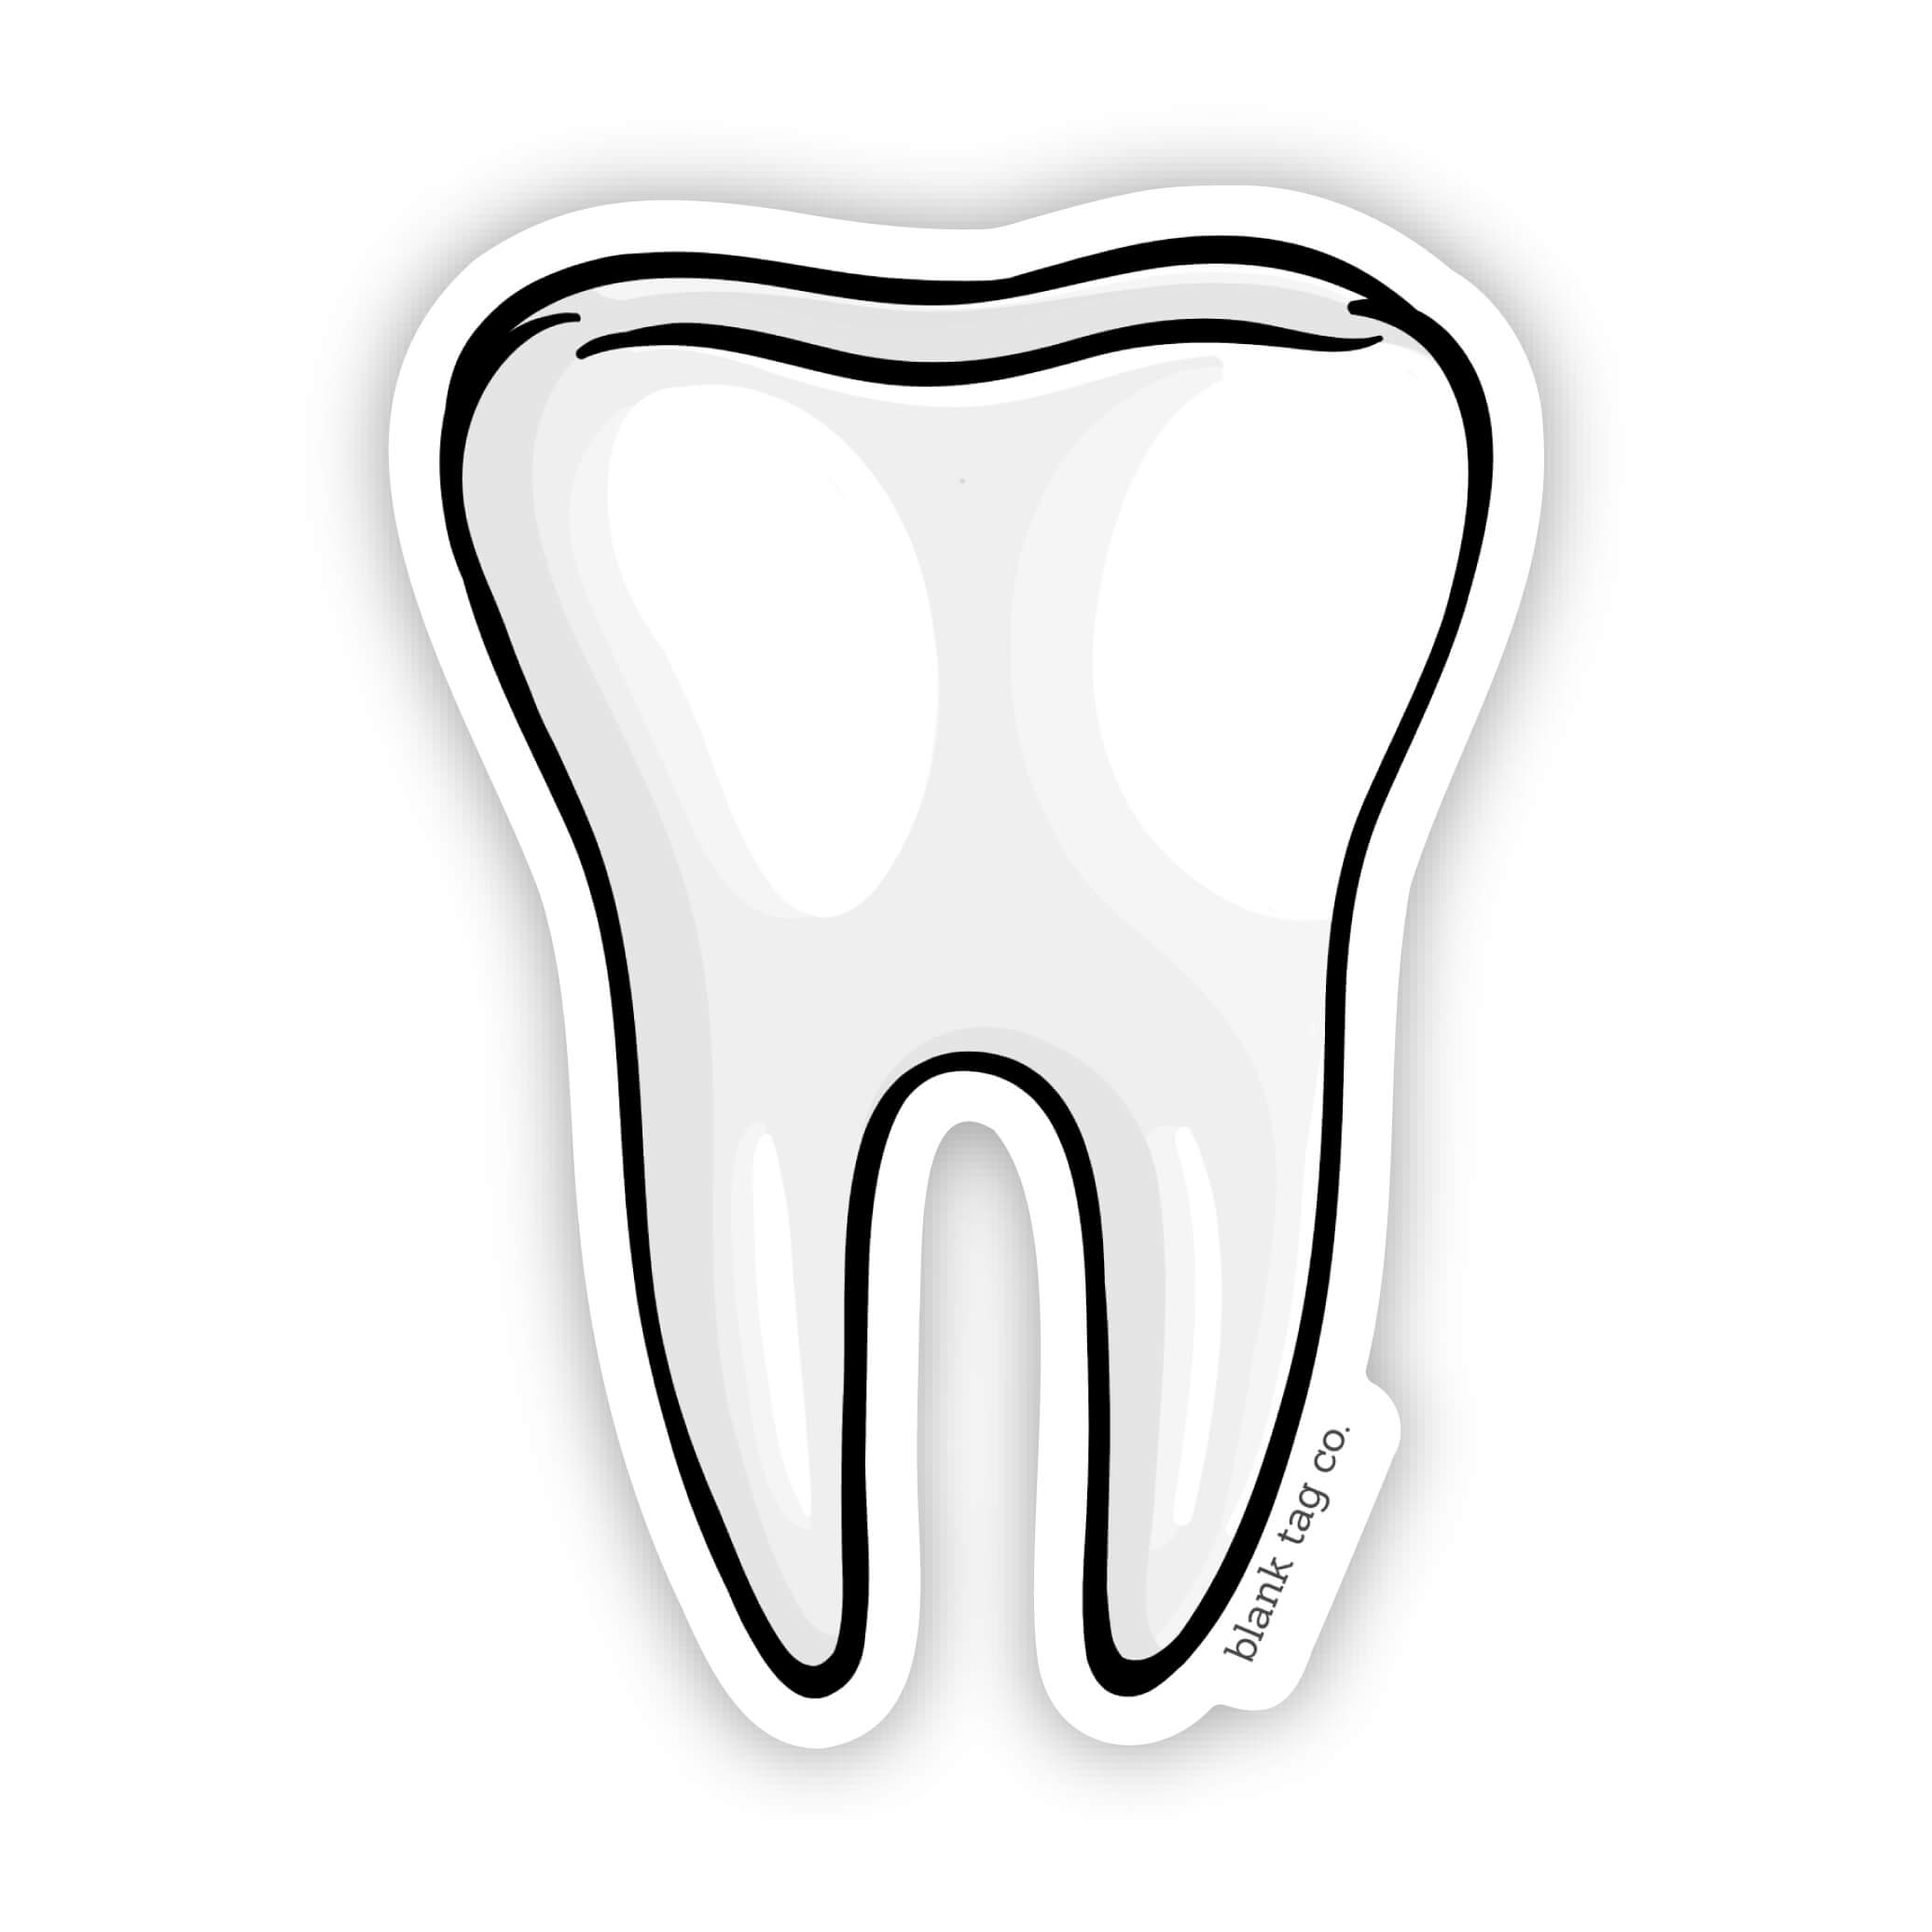 The Tooth Sticker